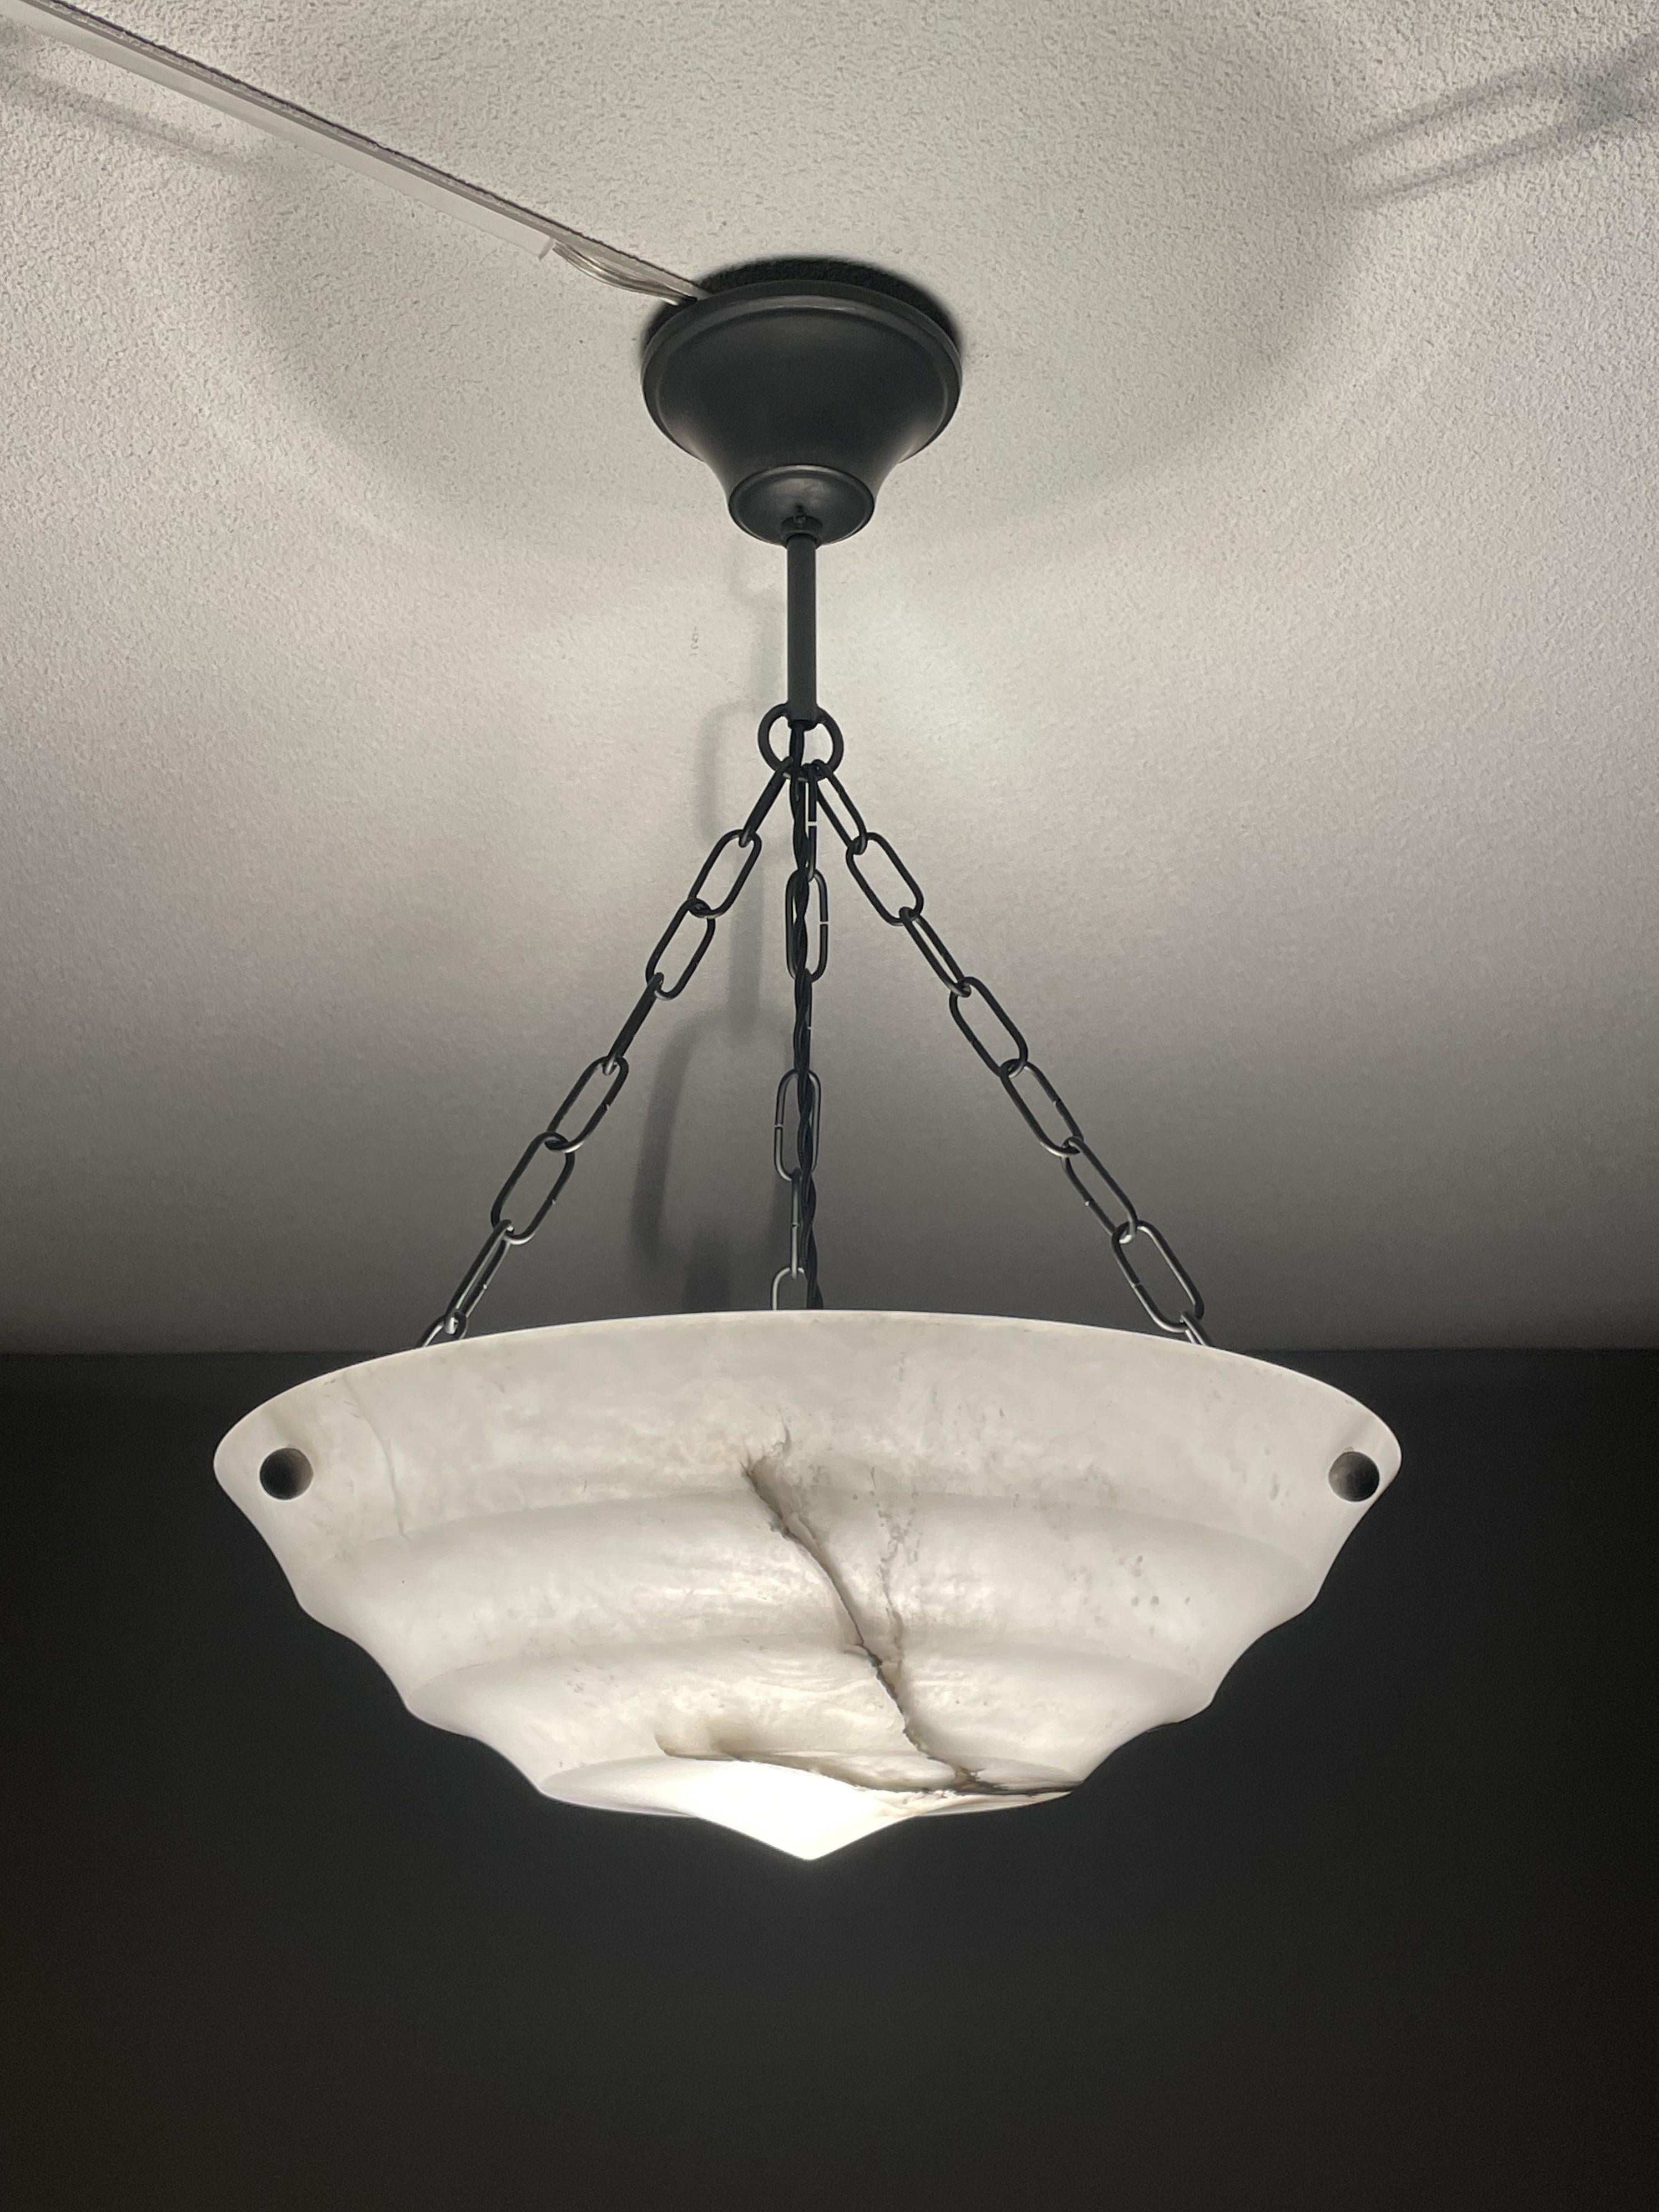 Timeless alabaster pendant for a smaller room, entry hall or bedroom.

This rare fixture from the heydays of the European Art Deco era could soon be lighting up your days and evenings. Its remarkable, circular and layered shade is all hand carved